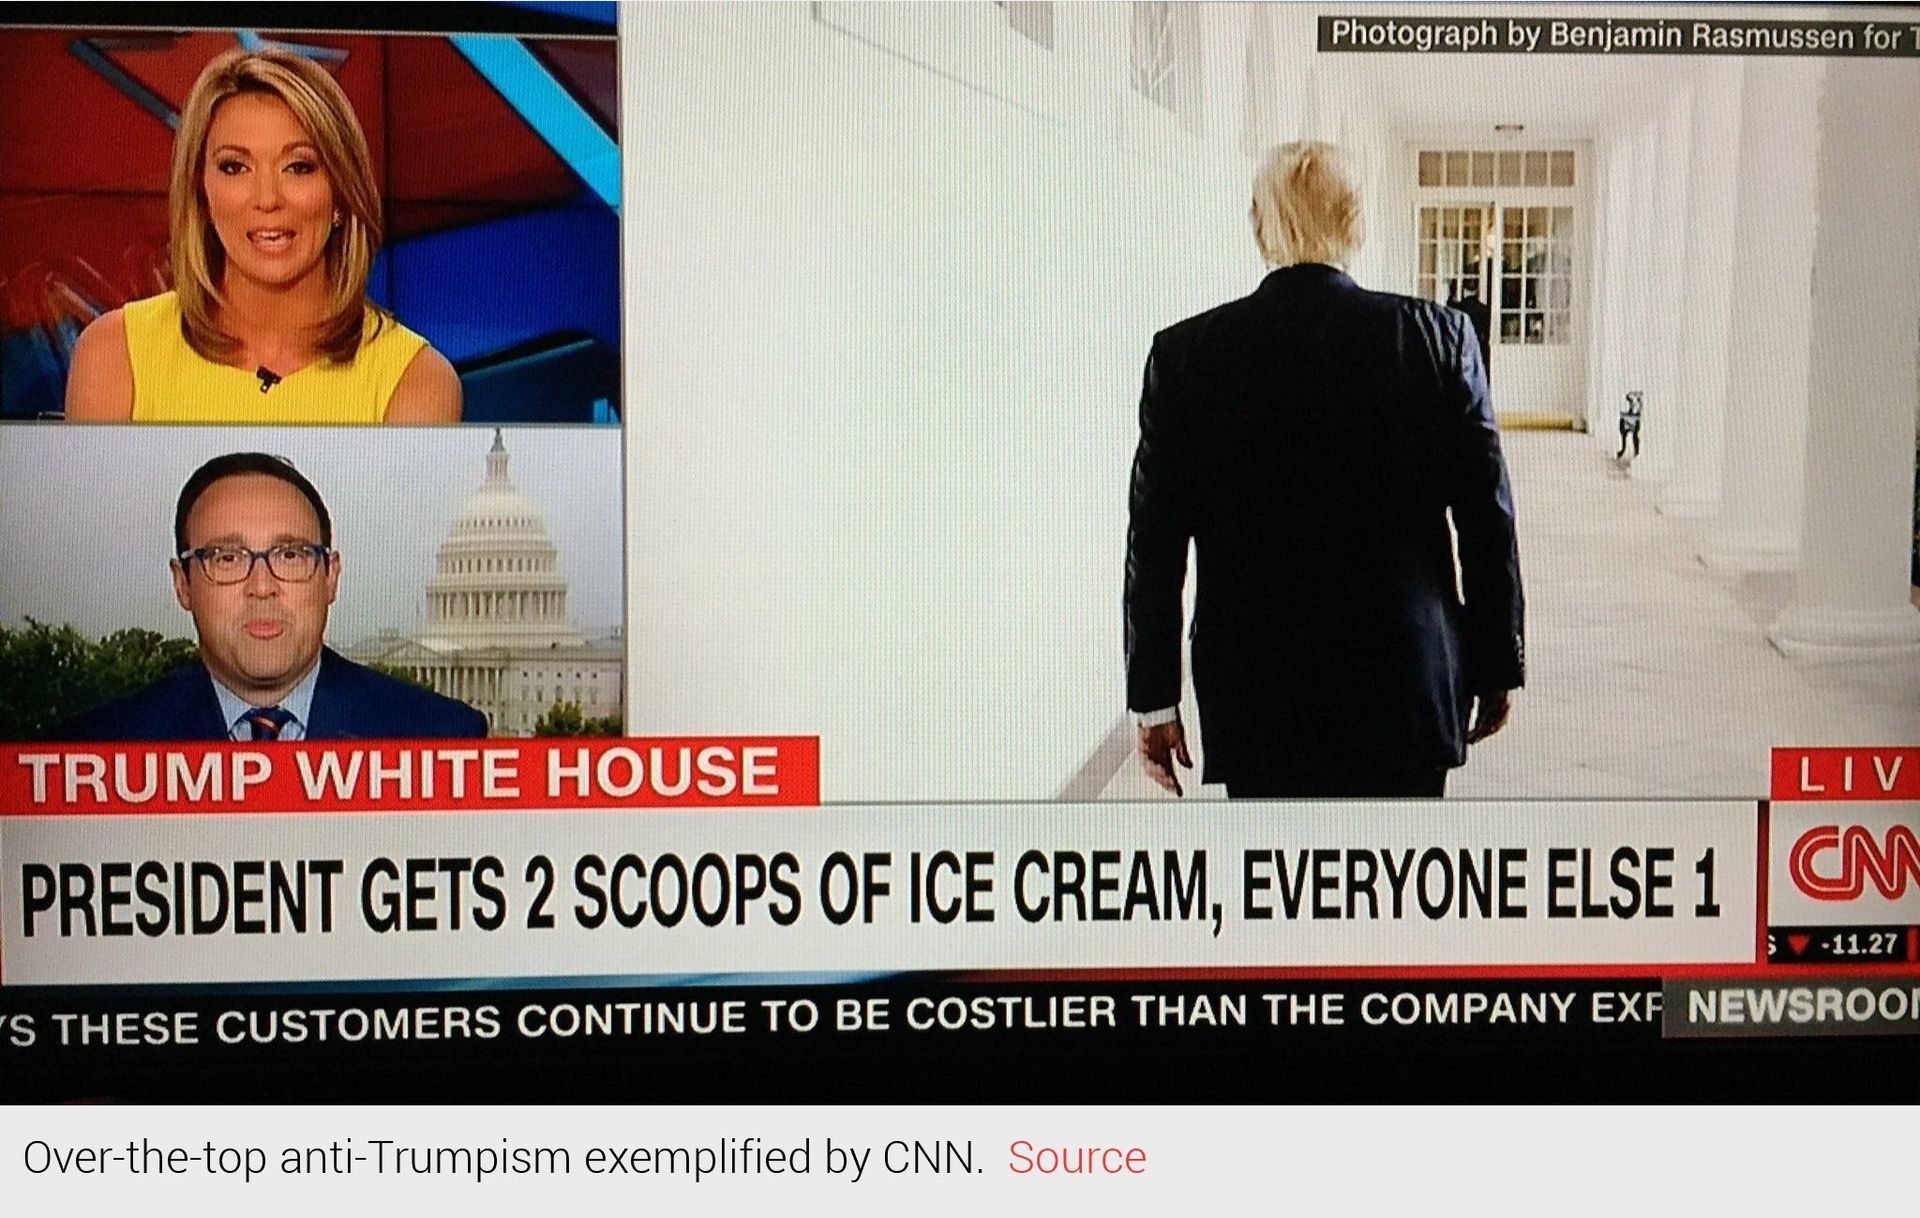 Over-the-top Anti-Trumpism exemplified by CNN